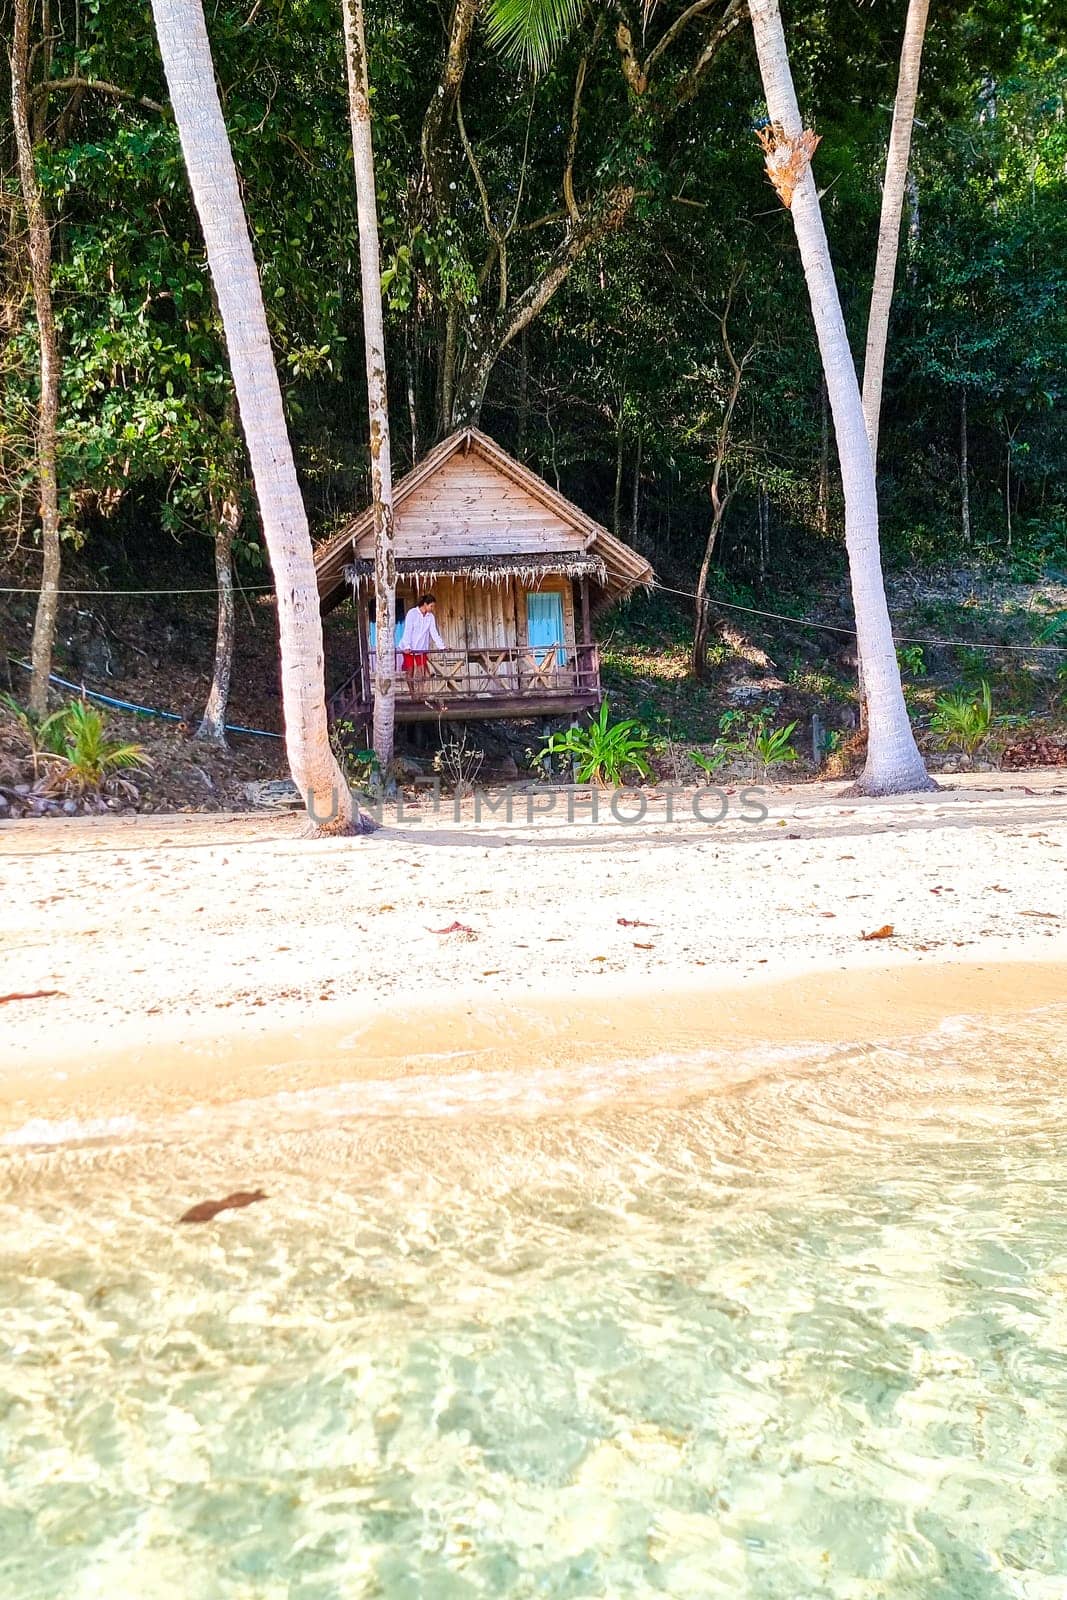 A traditional wooden hut nestled on the sandy shore of a pristine tropical beach, with lush palm trees swaying in the gentle breeze under a clear blue sky by fokkebok